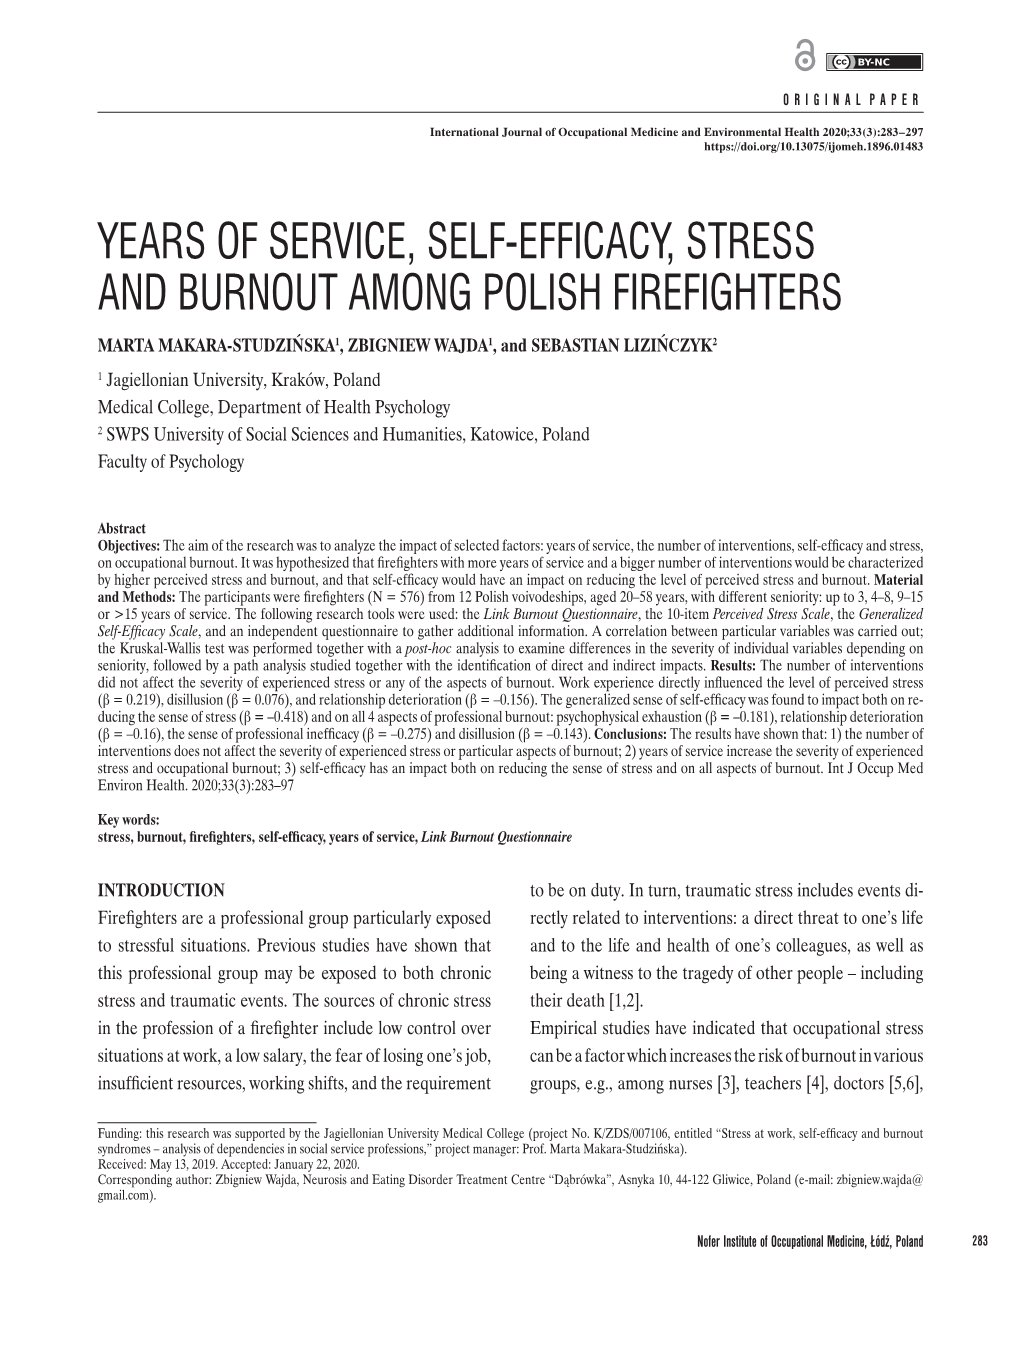 Years of Service, Self-Efficacy, Stress and Burnout Among Polish Firefighters